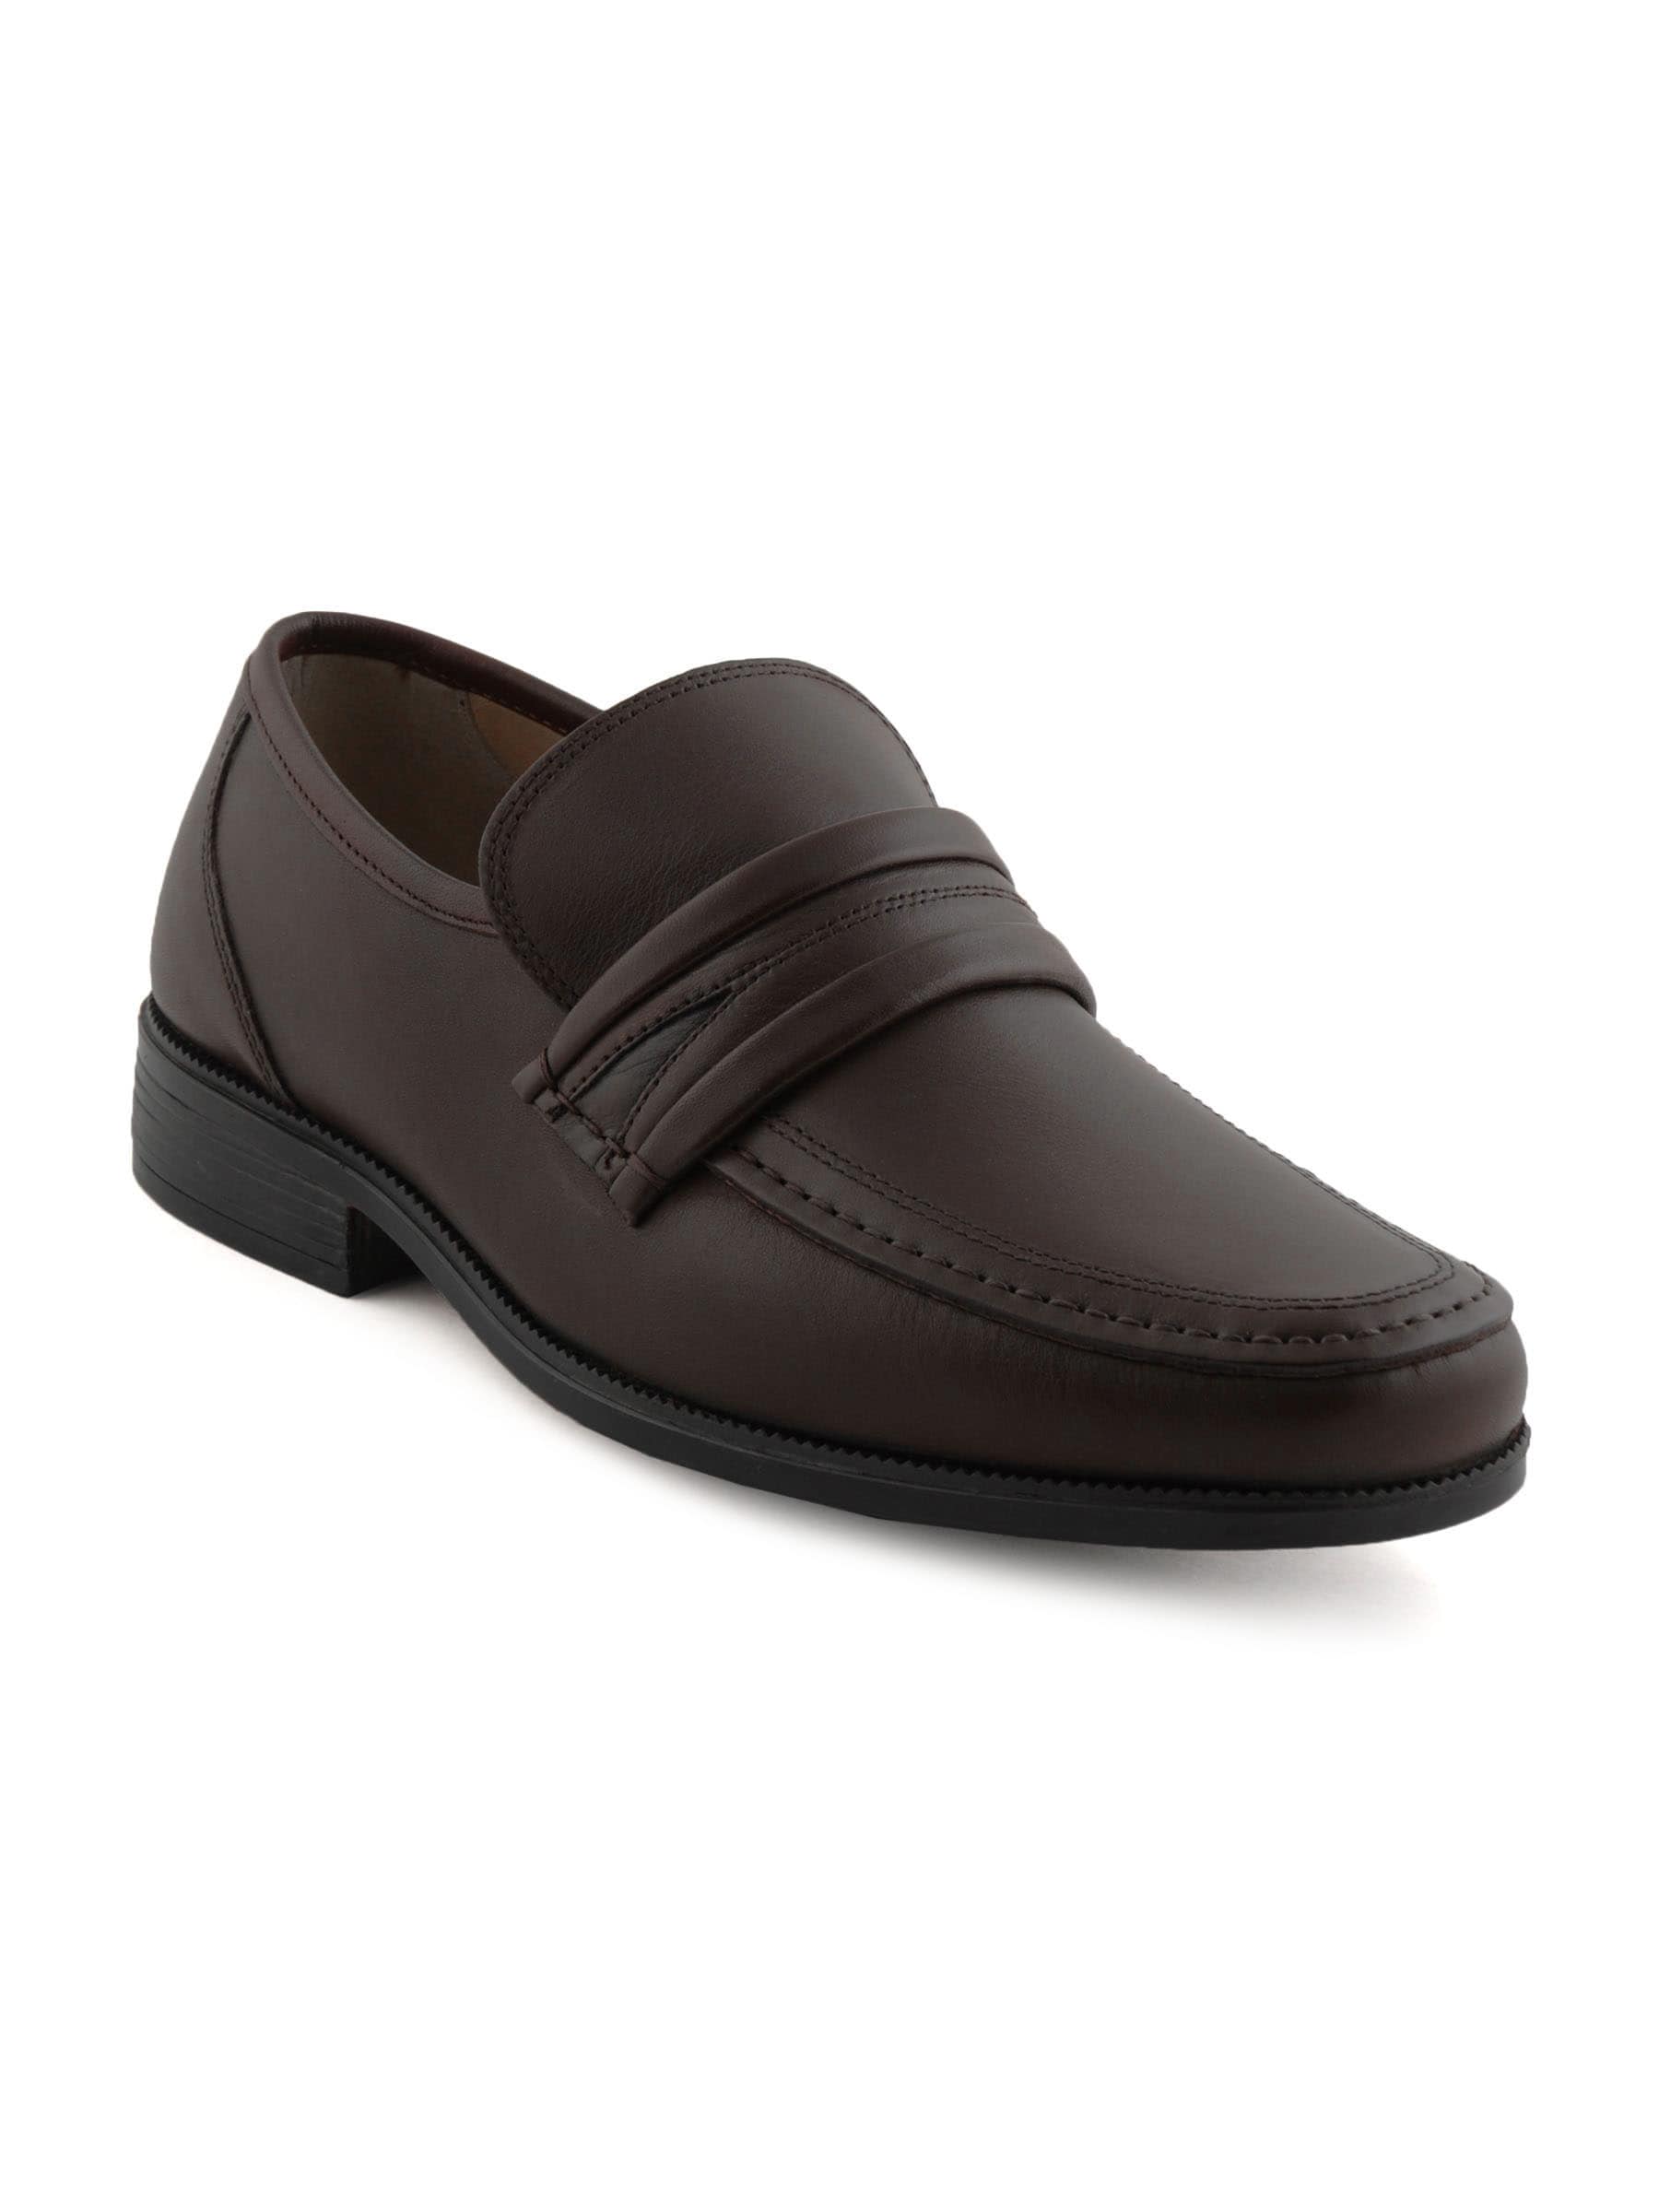 Clarks Men Brown Leather Penny Loafers